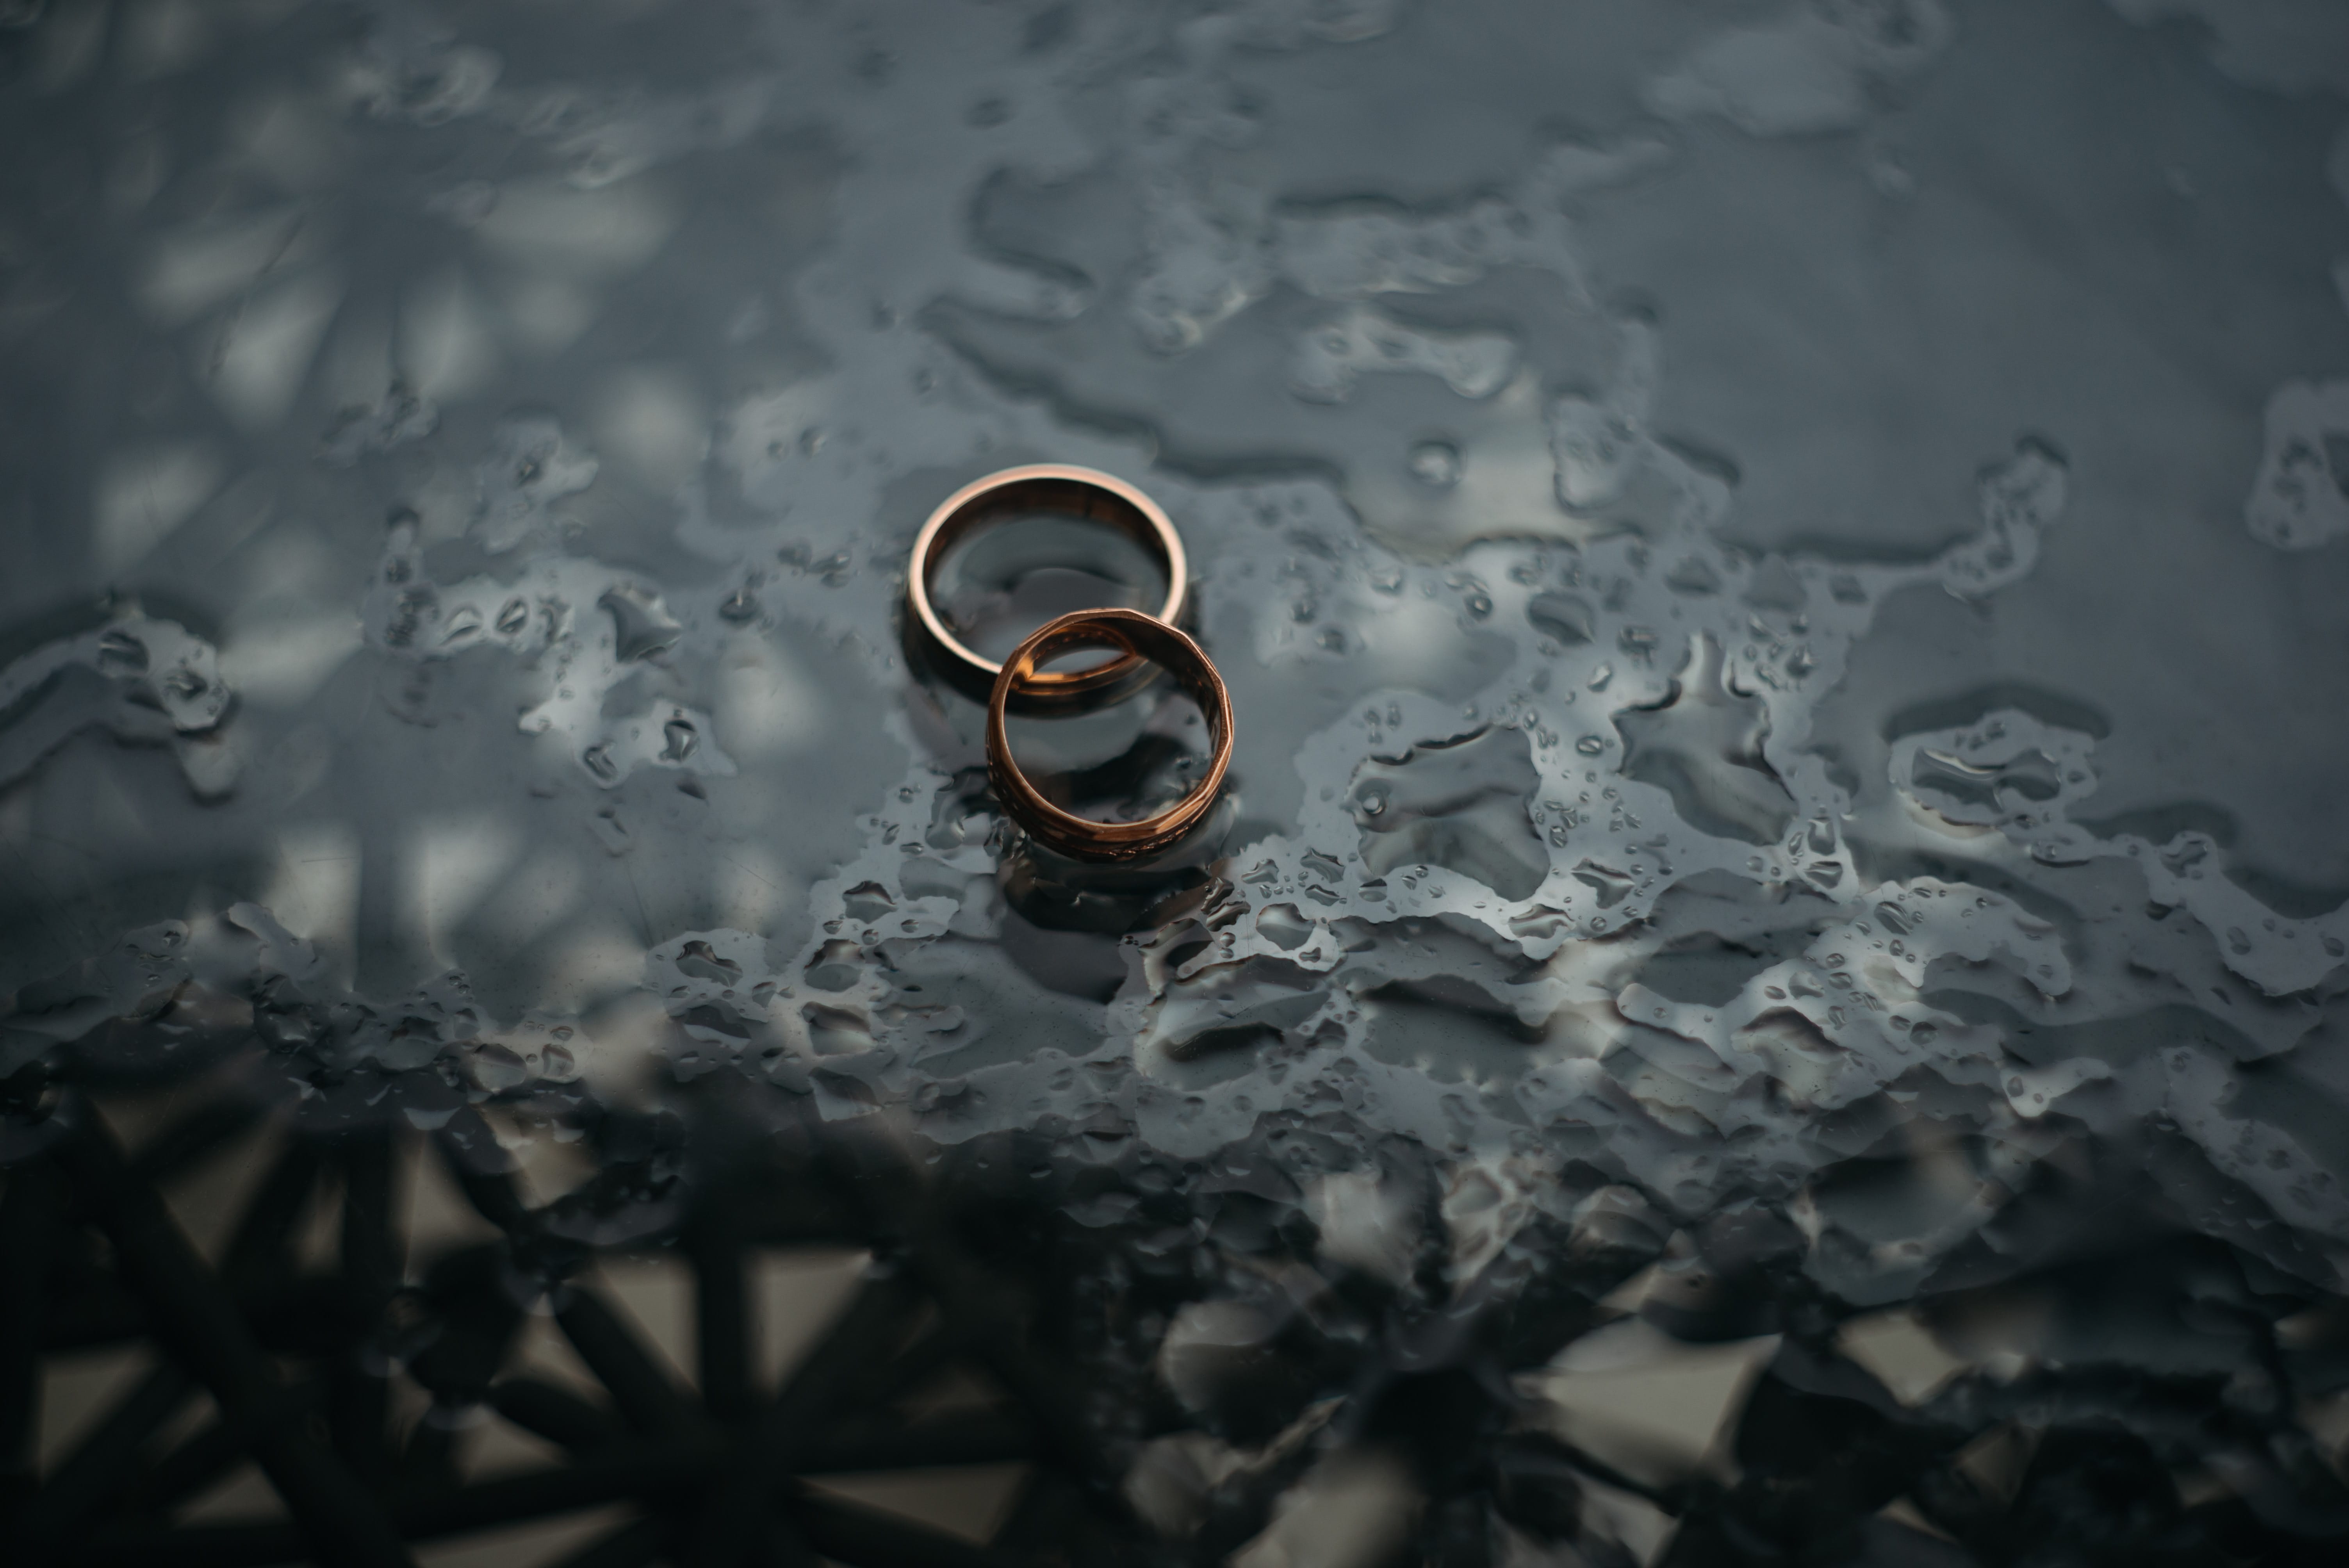 Wedding rings on a wet black surface.